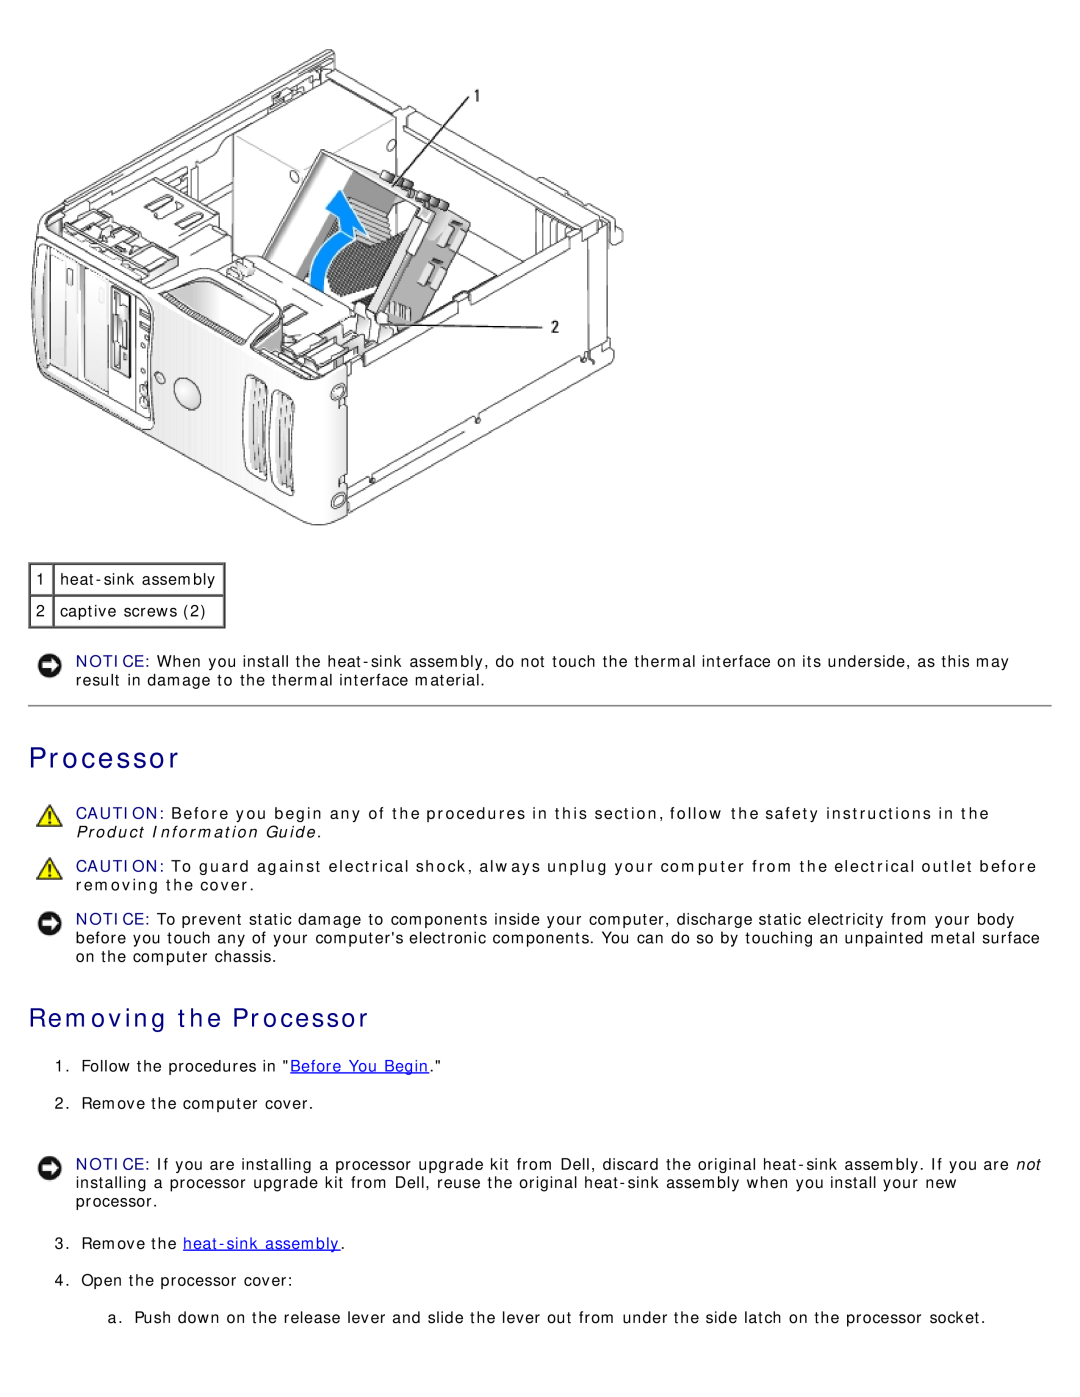 Dell DCSM manual Removing the Processor, Remove the heat-sink assembly 